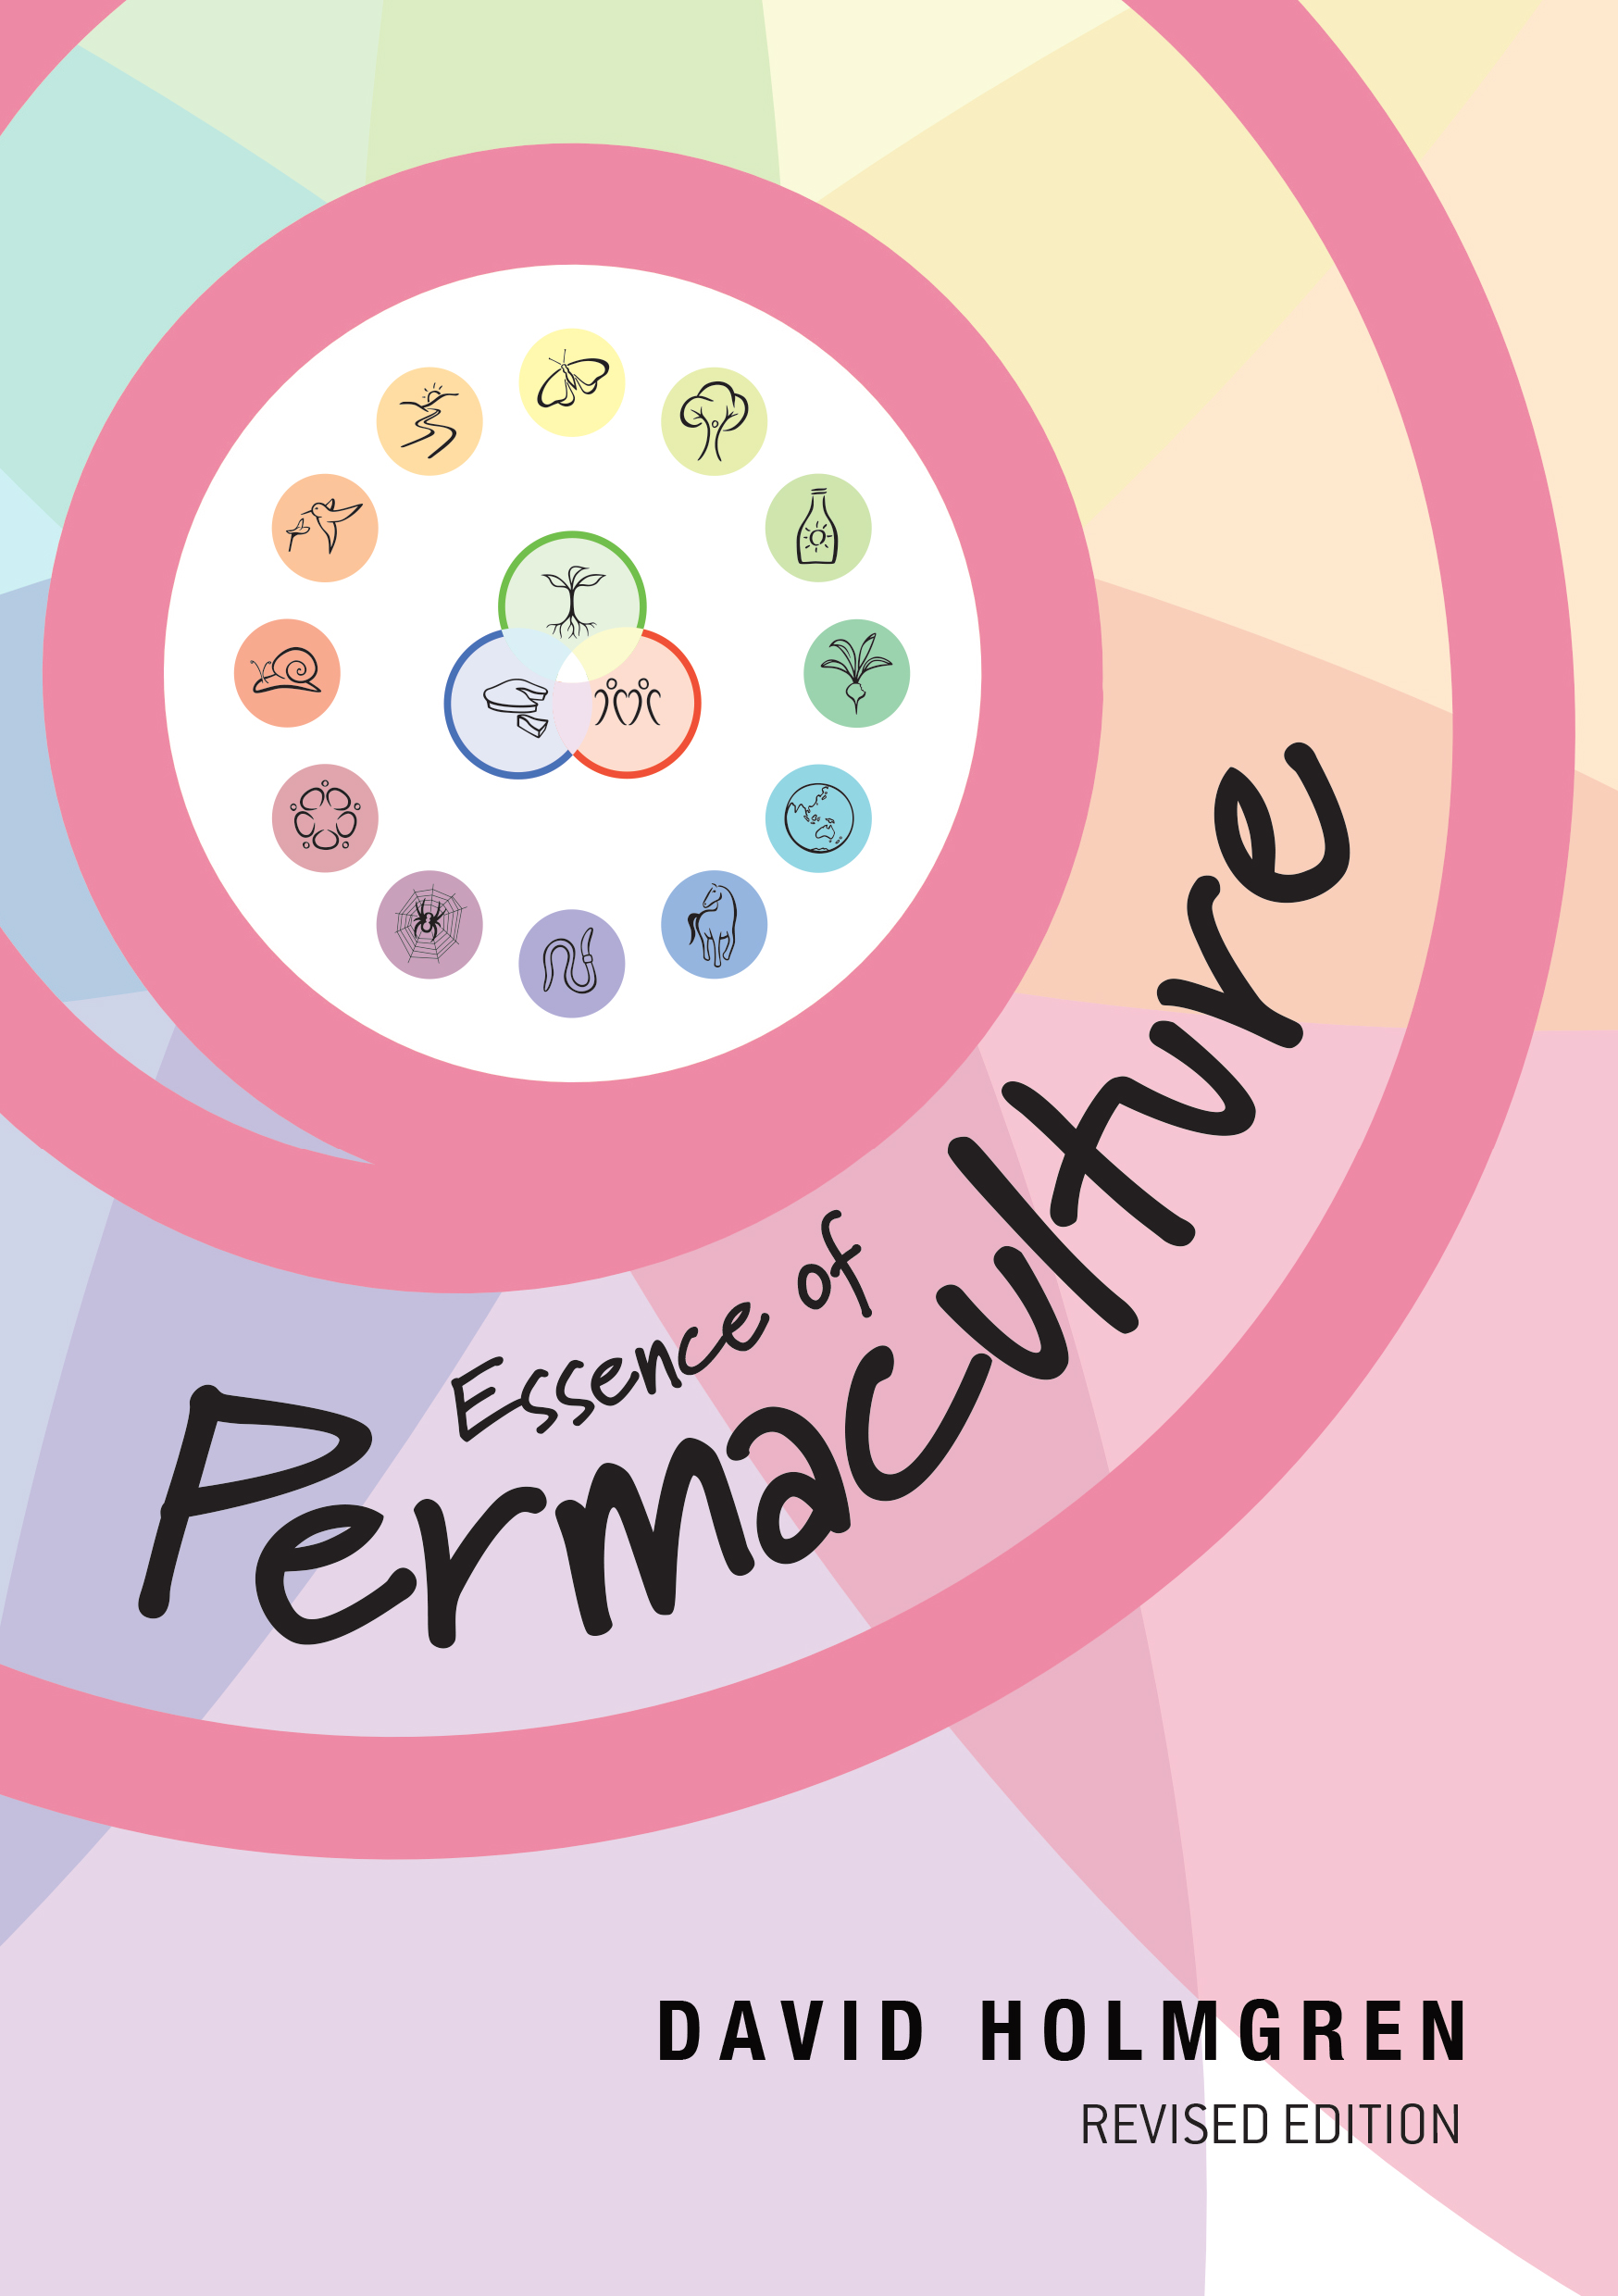 Contents Essence of Permaculture was created as an accessible introduction - photo 1